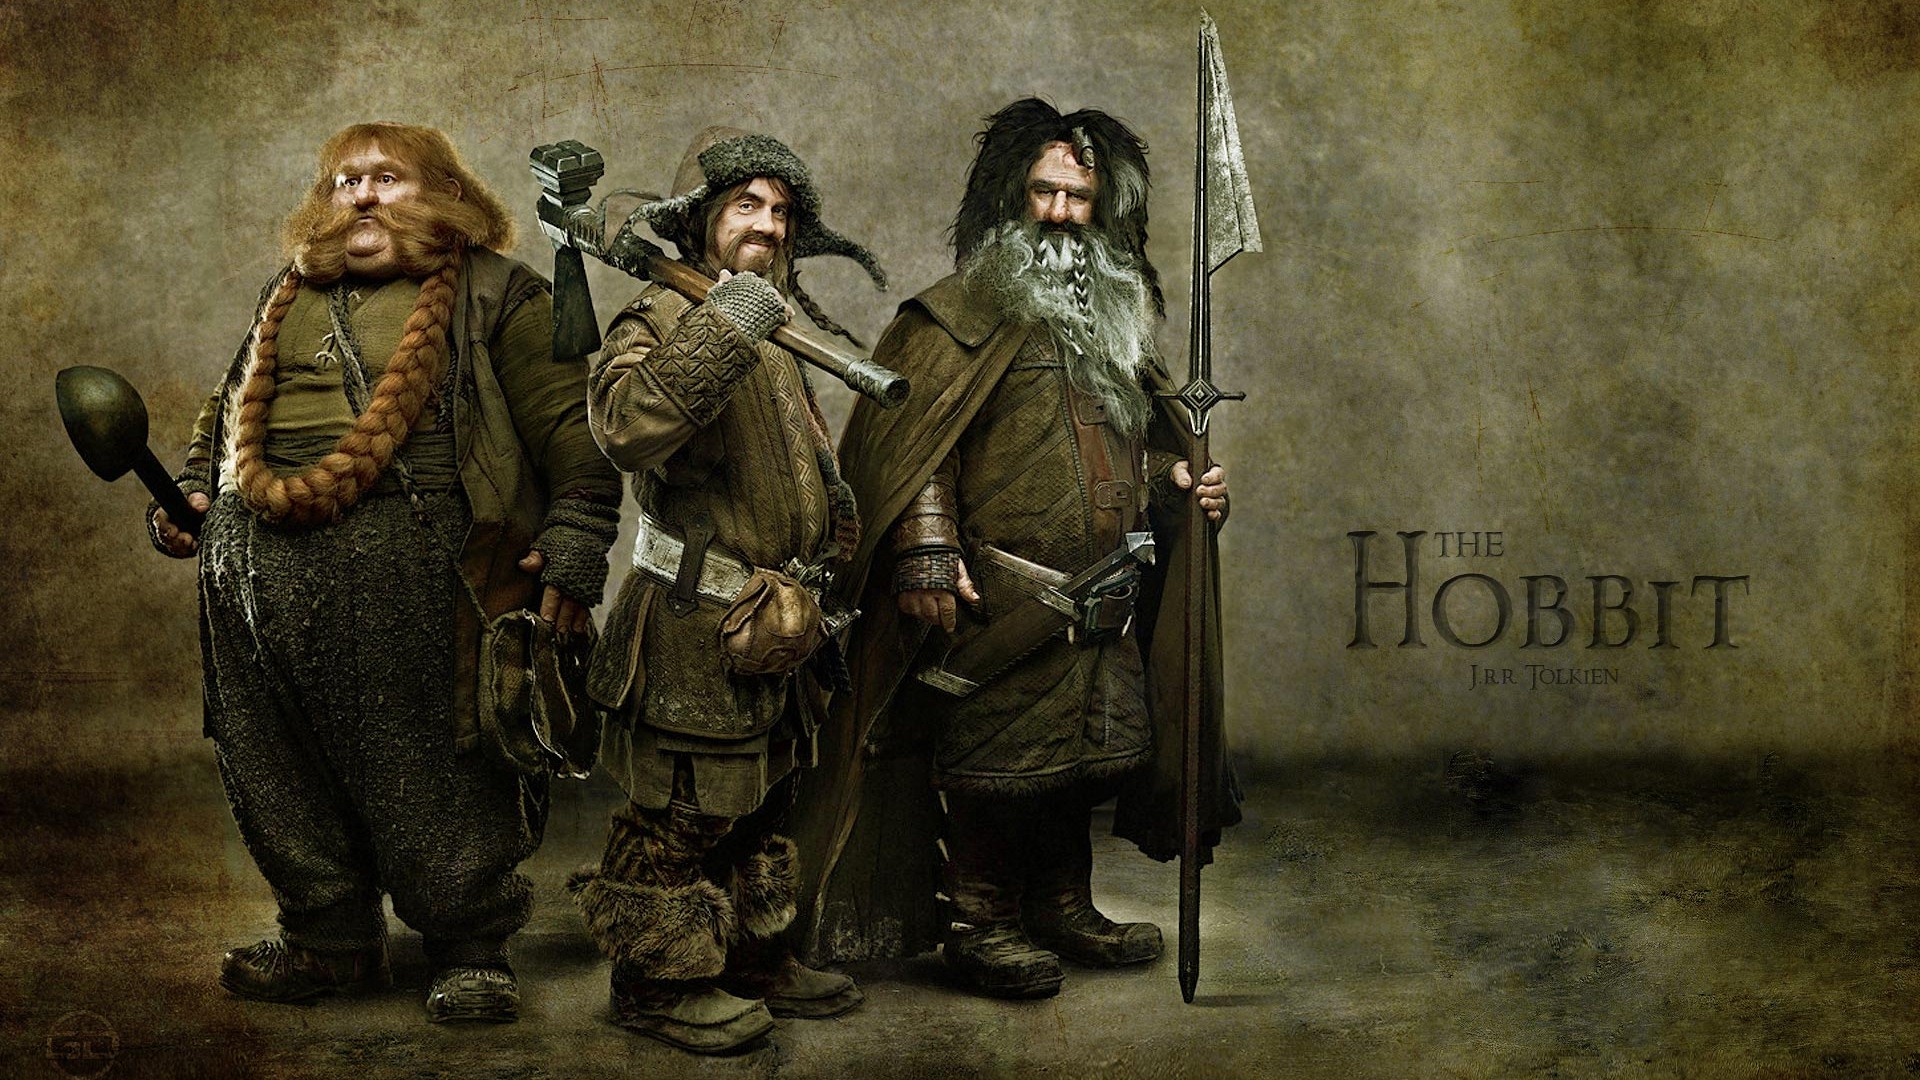 The Hobbit: An Unexpected Journey HD wallpapers #5 - 1920x1080